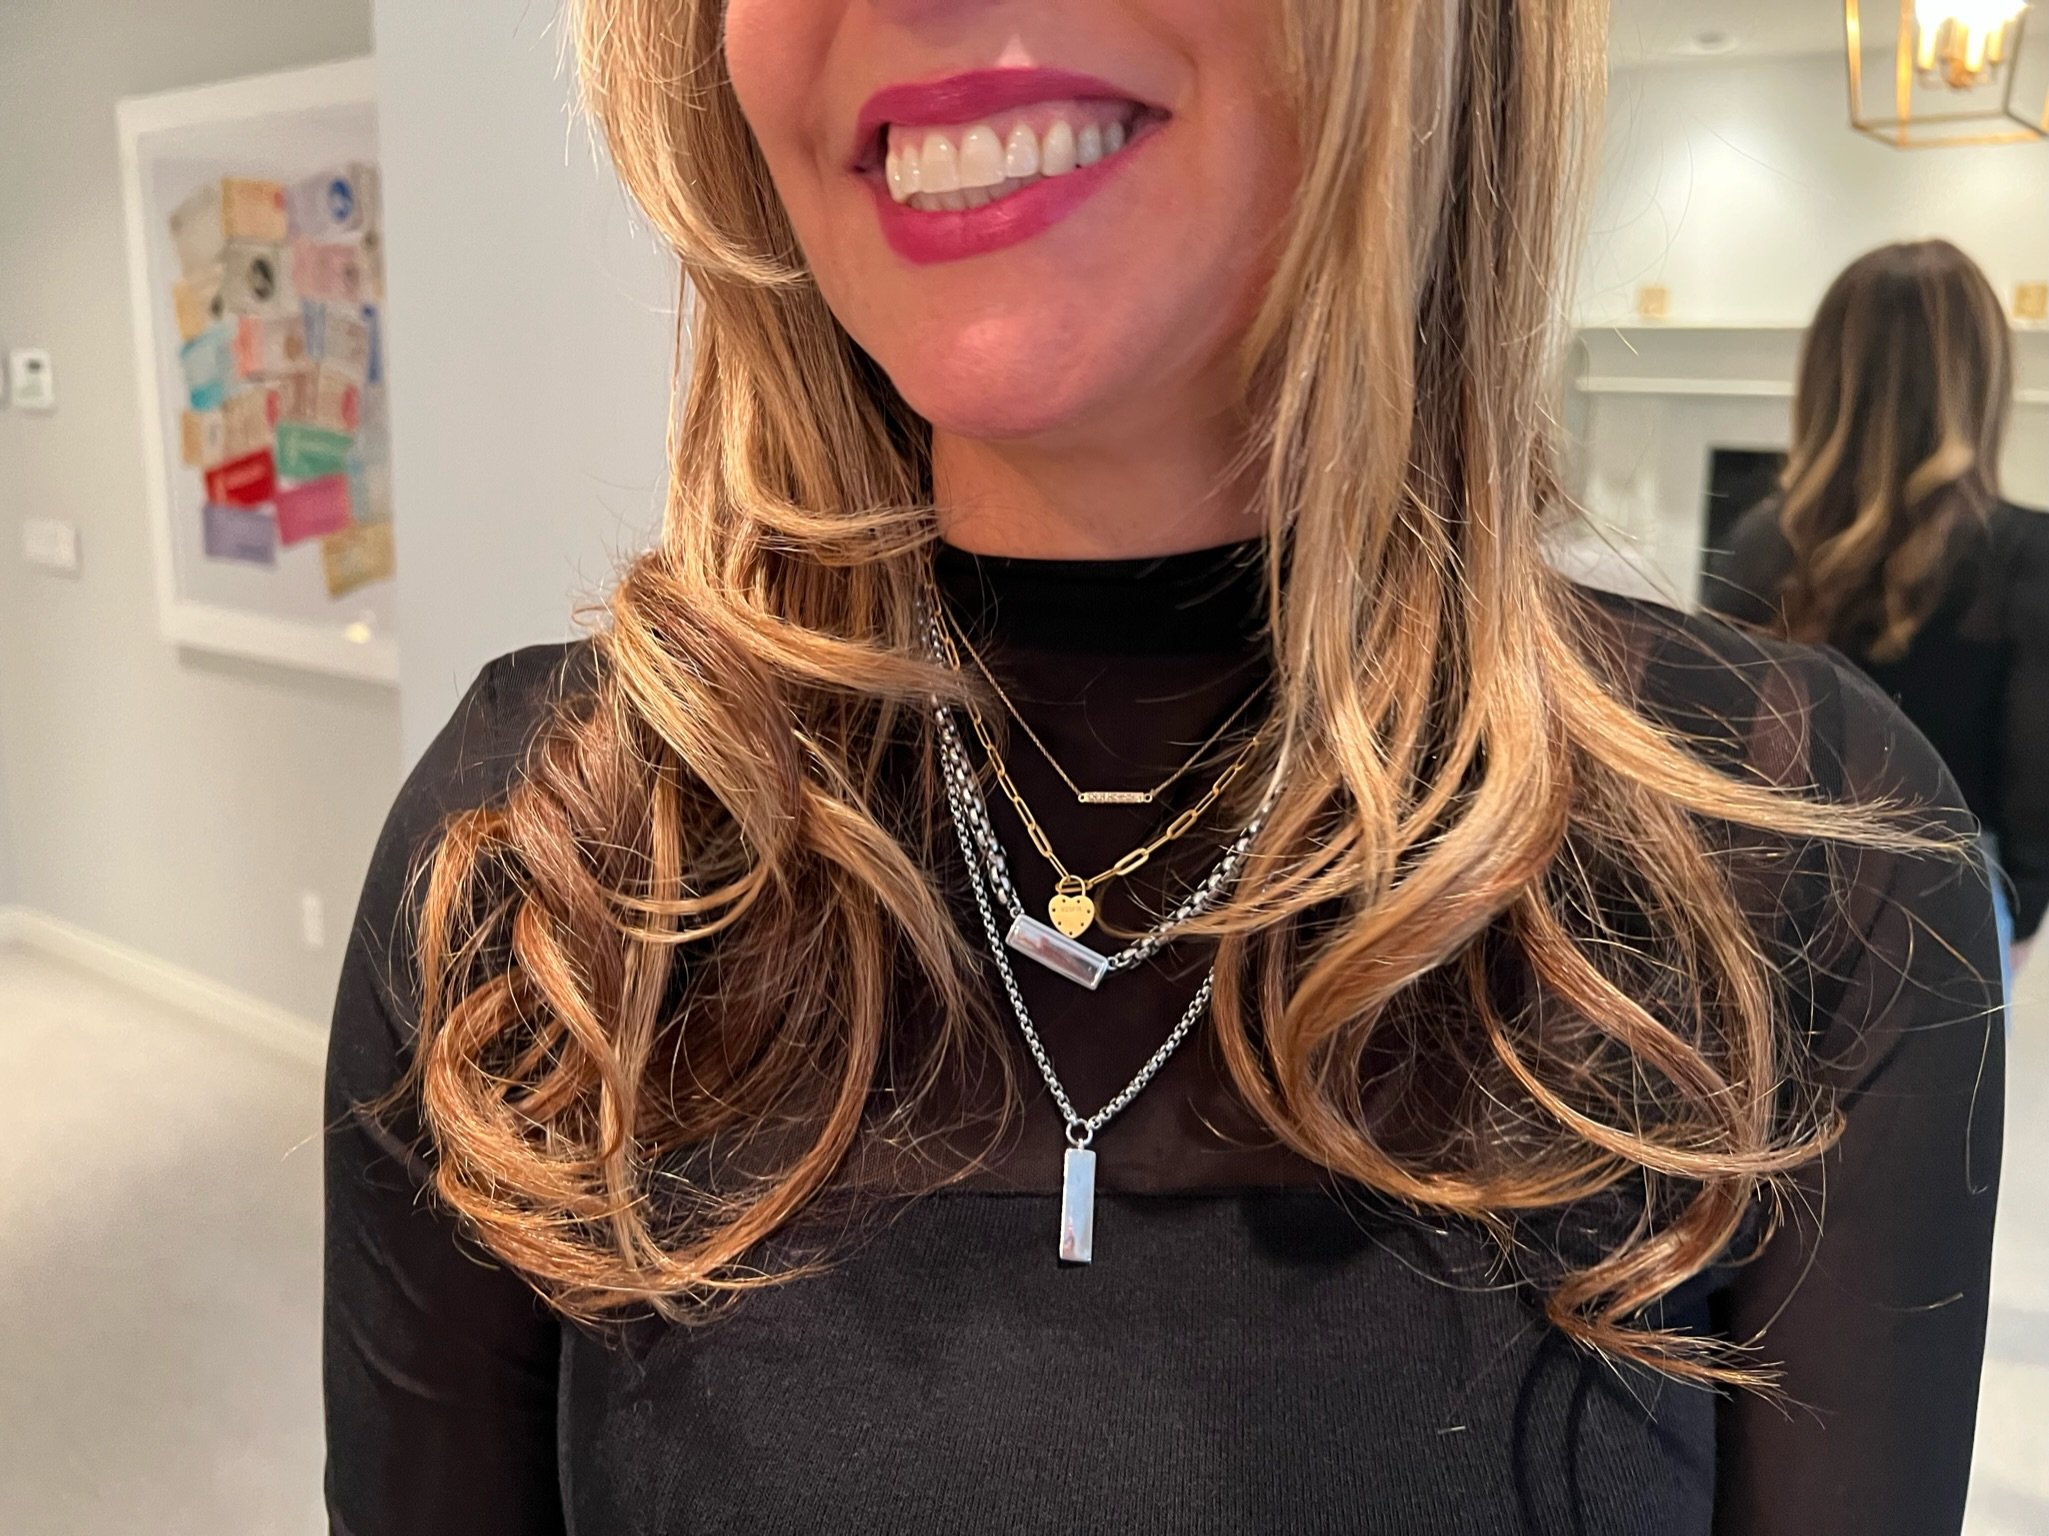 How to Wear Mixed Metal Jewelry: 5 Tips for Mixing Gold & Silver Jewelry